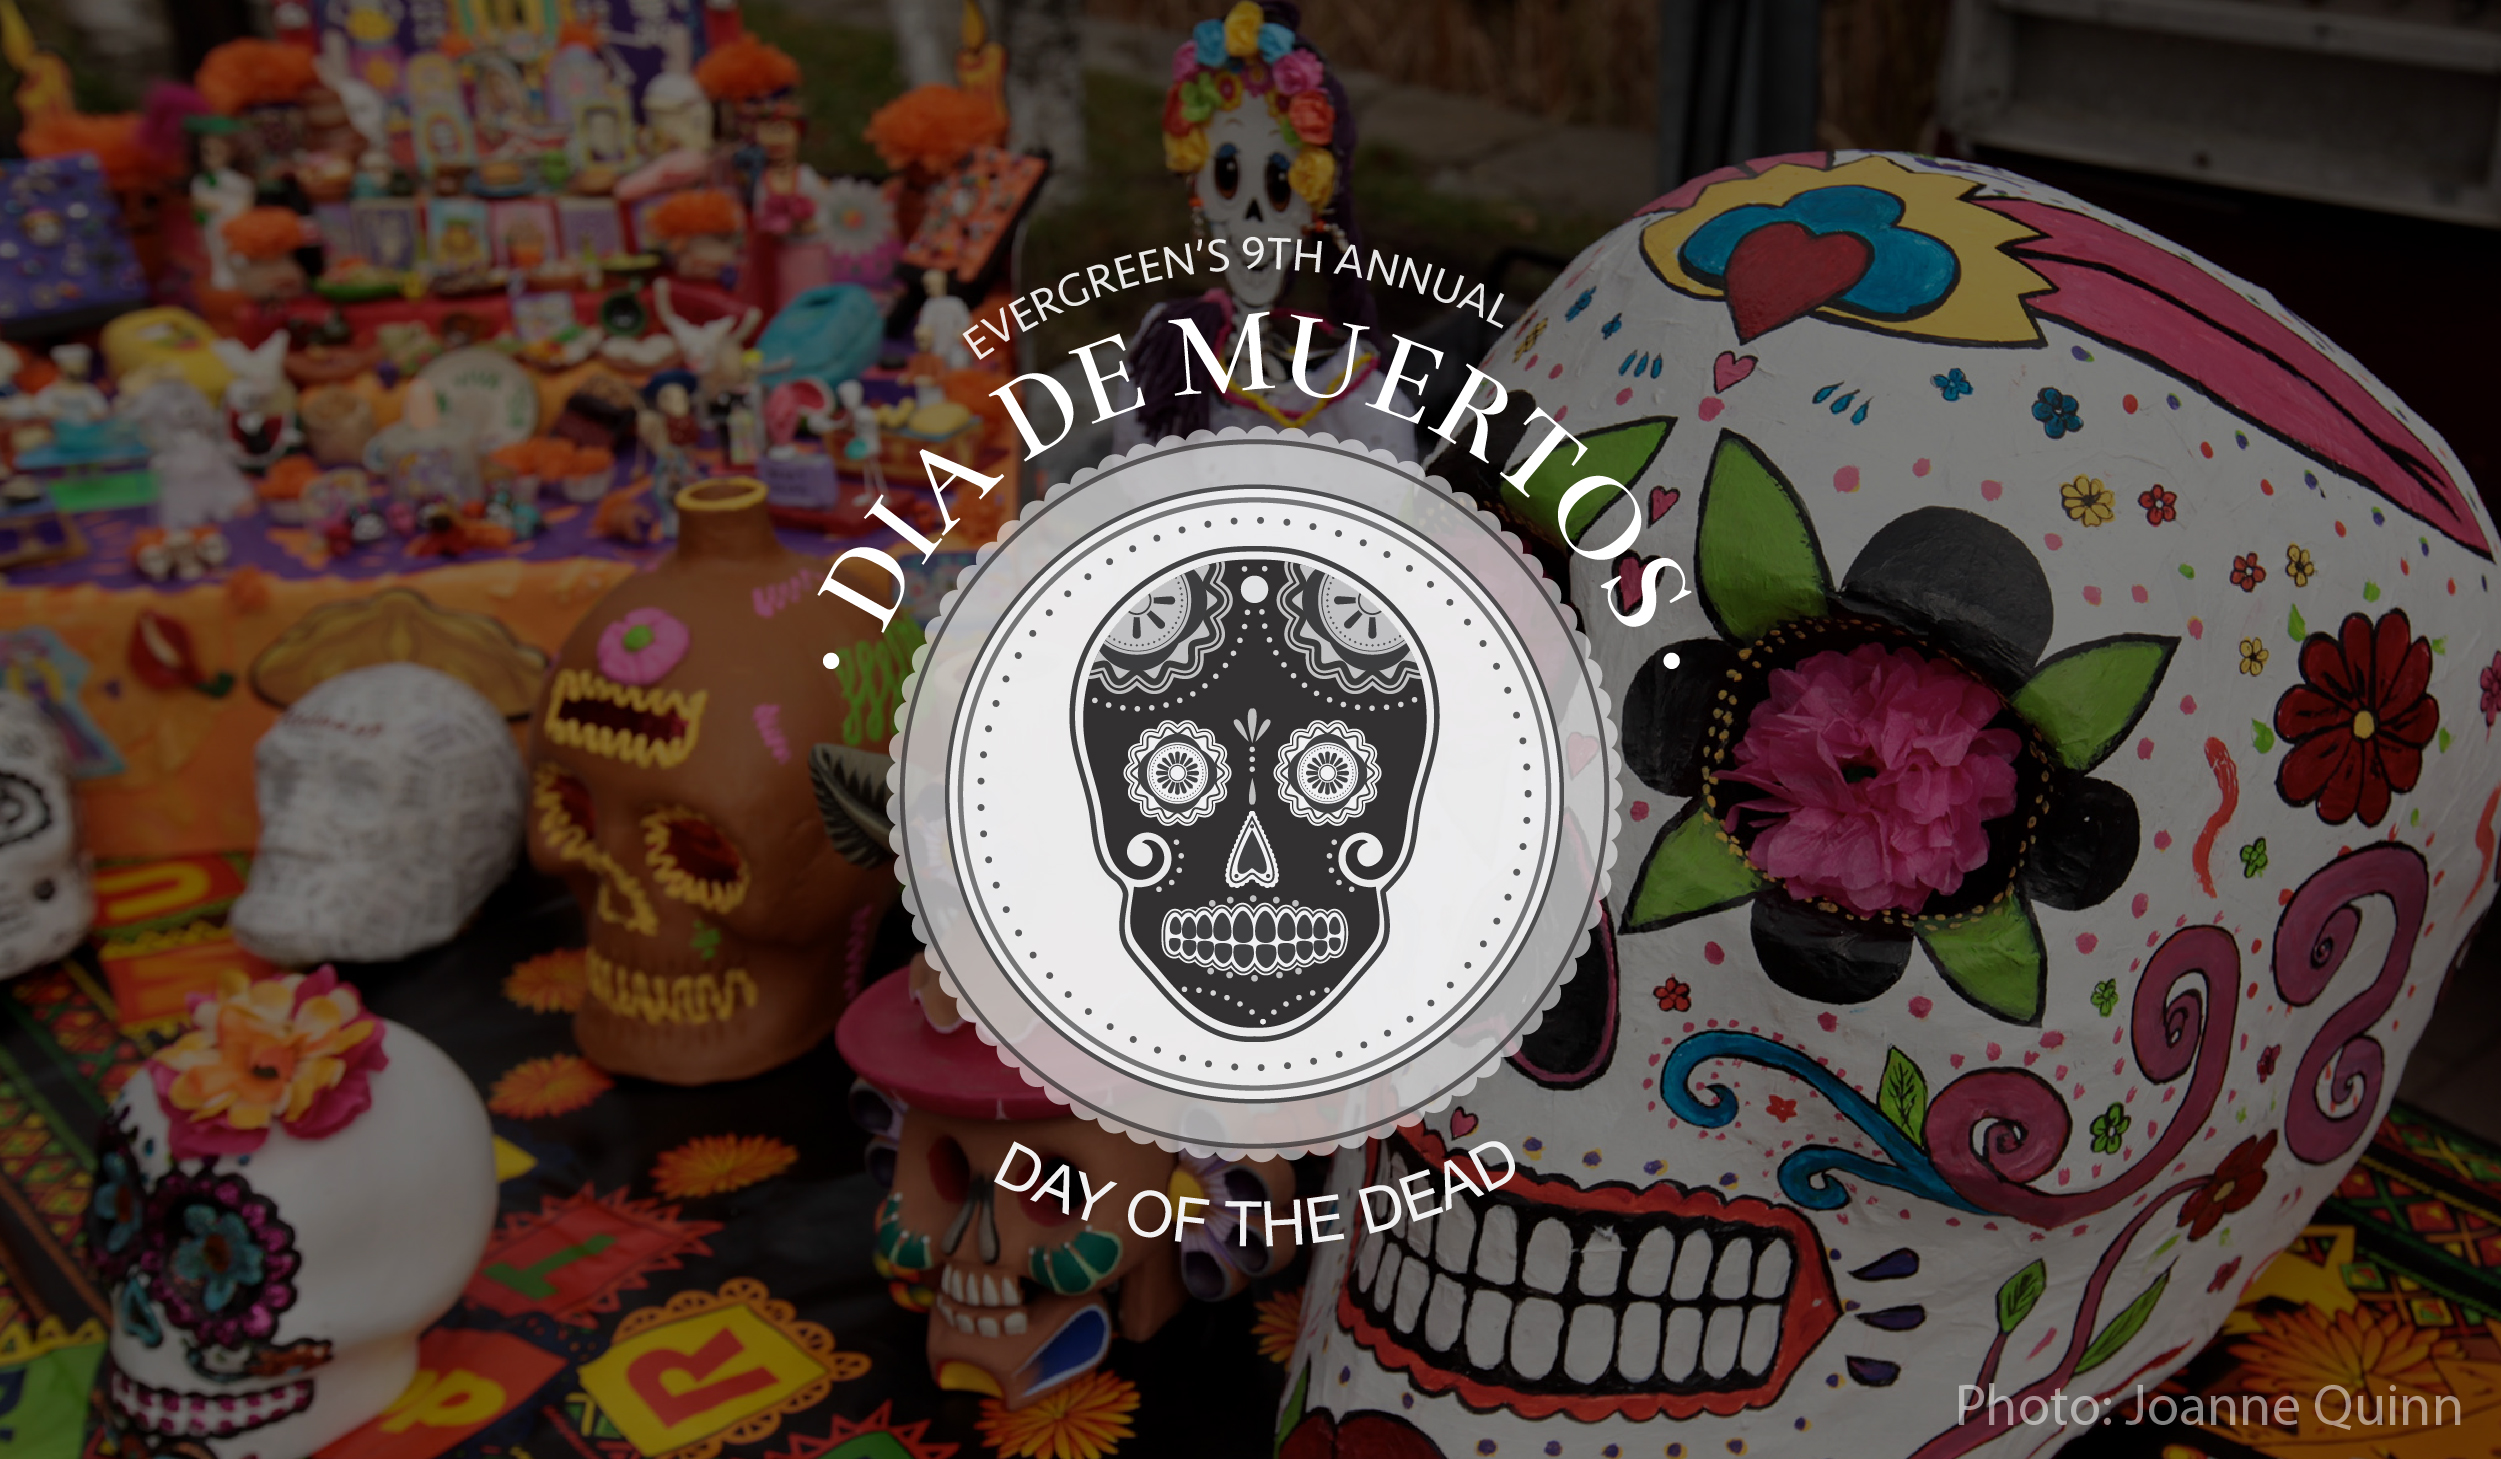 Evergreen's 9th Annual Day of the Dead Celebration